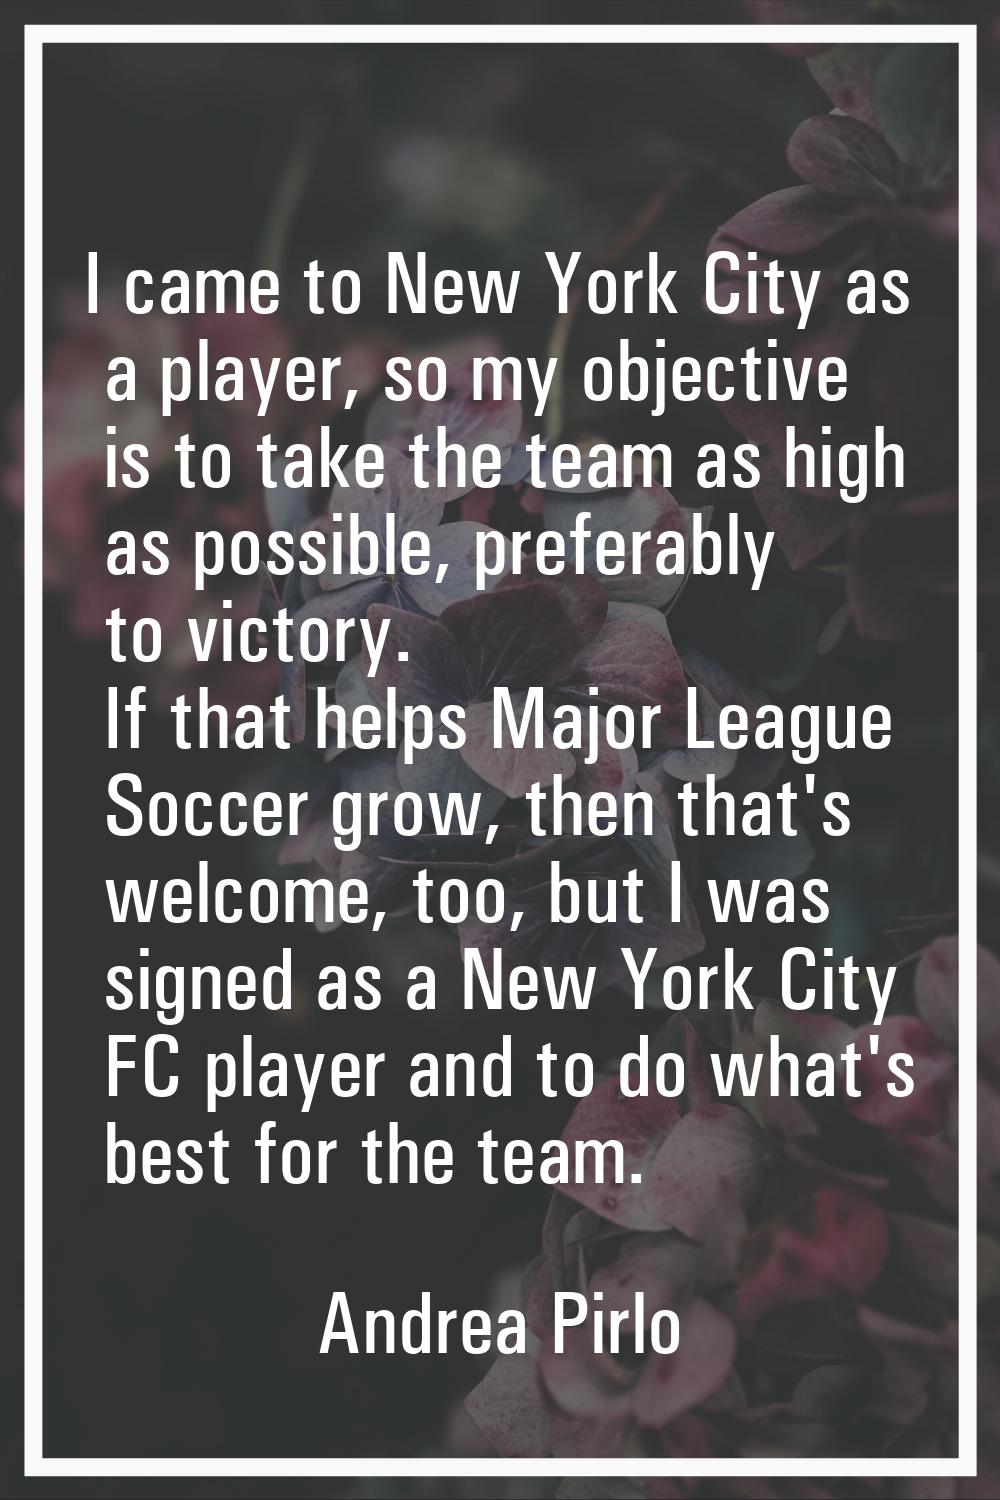 I came to New York City as a player, so my objective is to take the team as high as possible, prefe